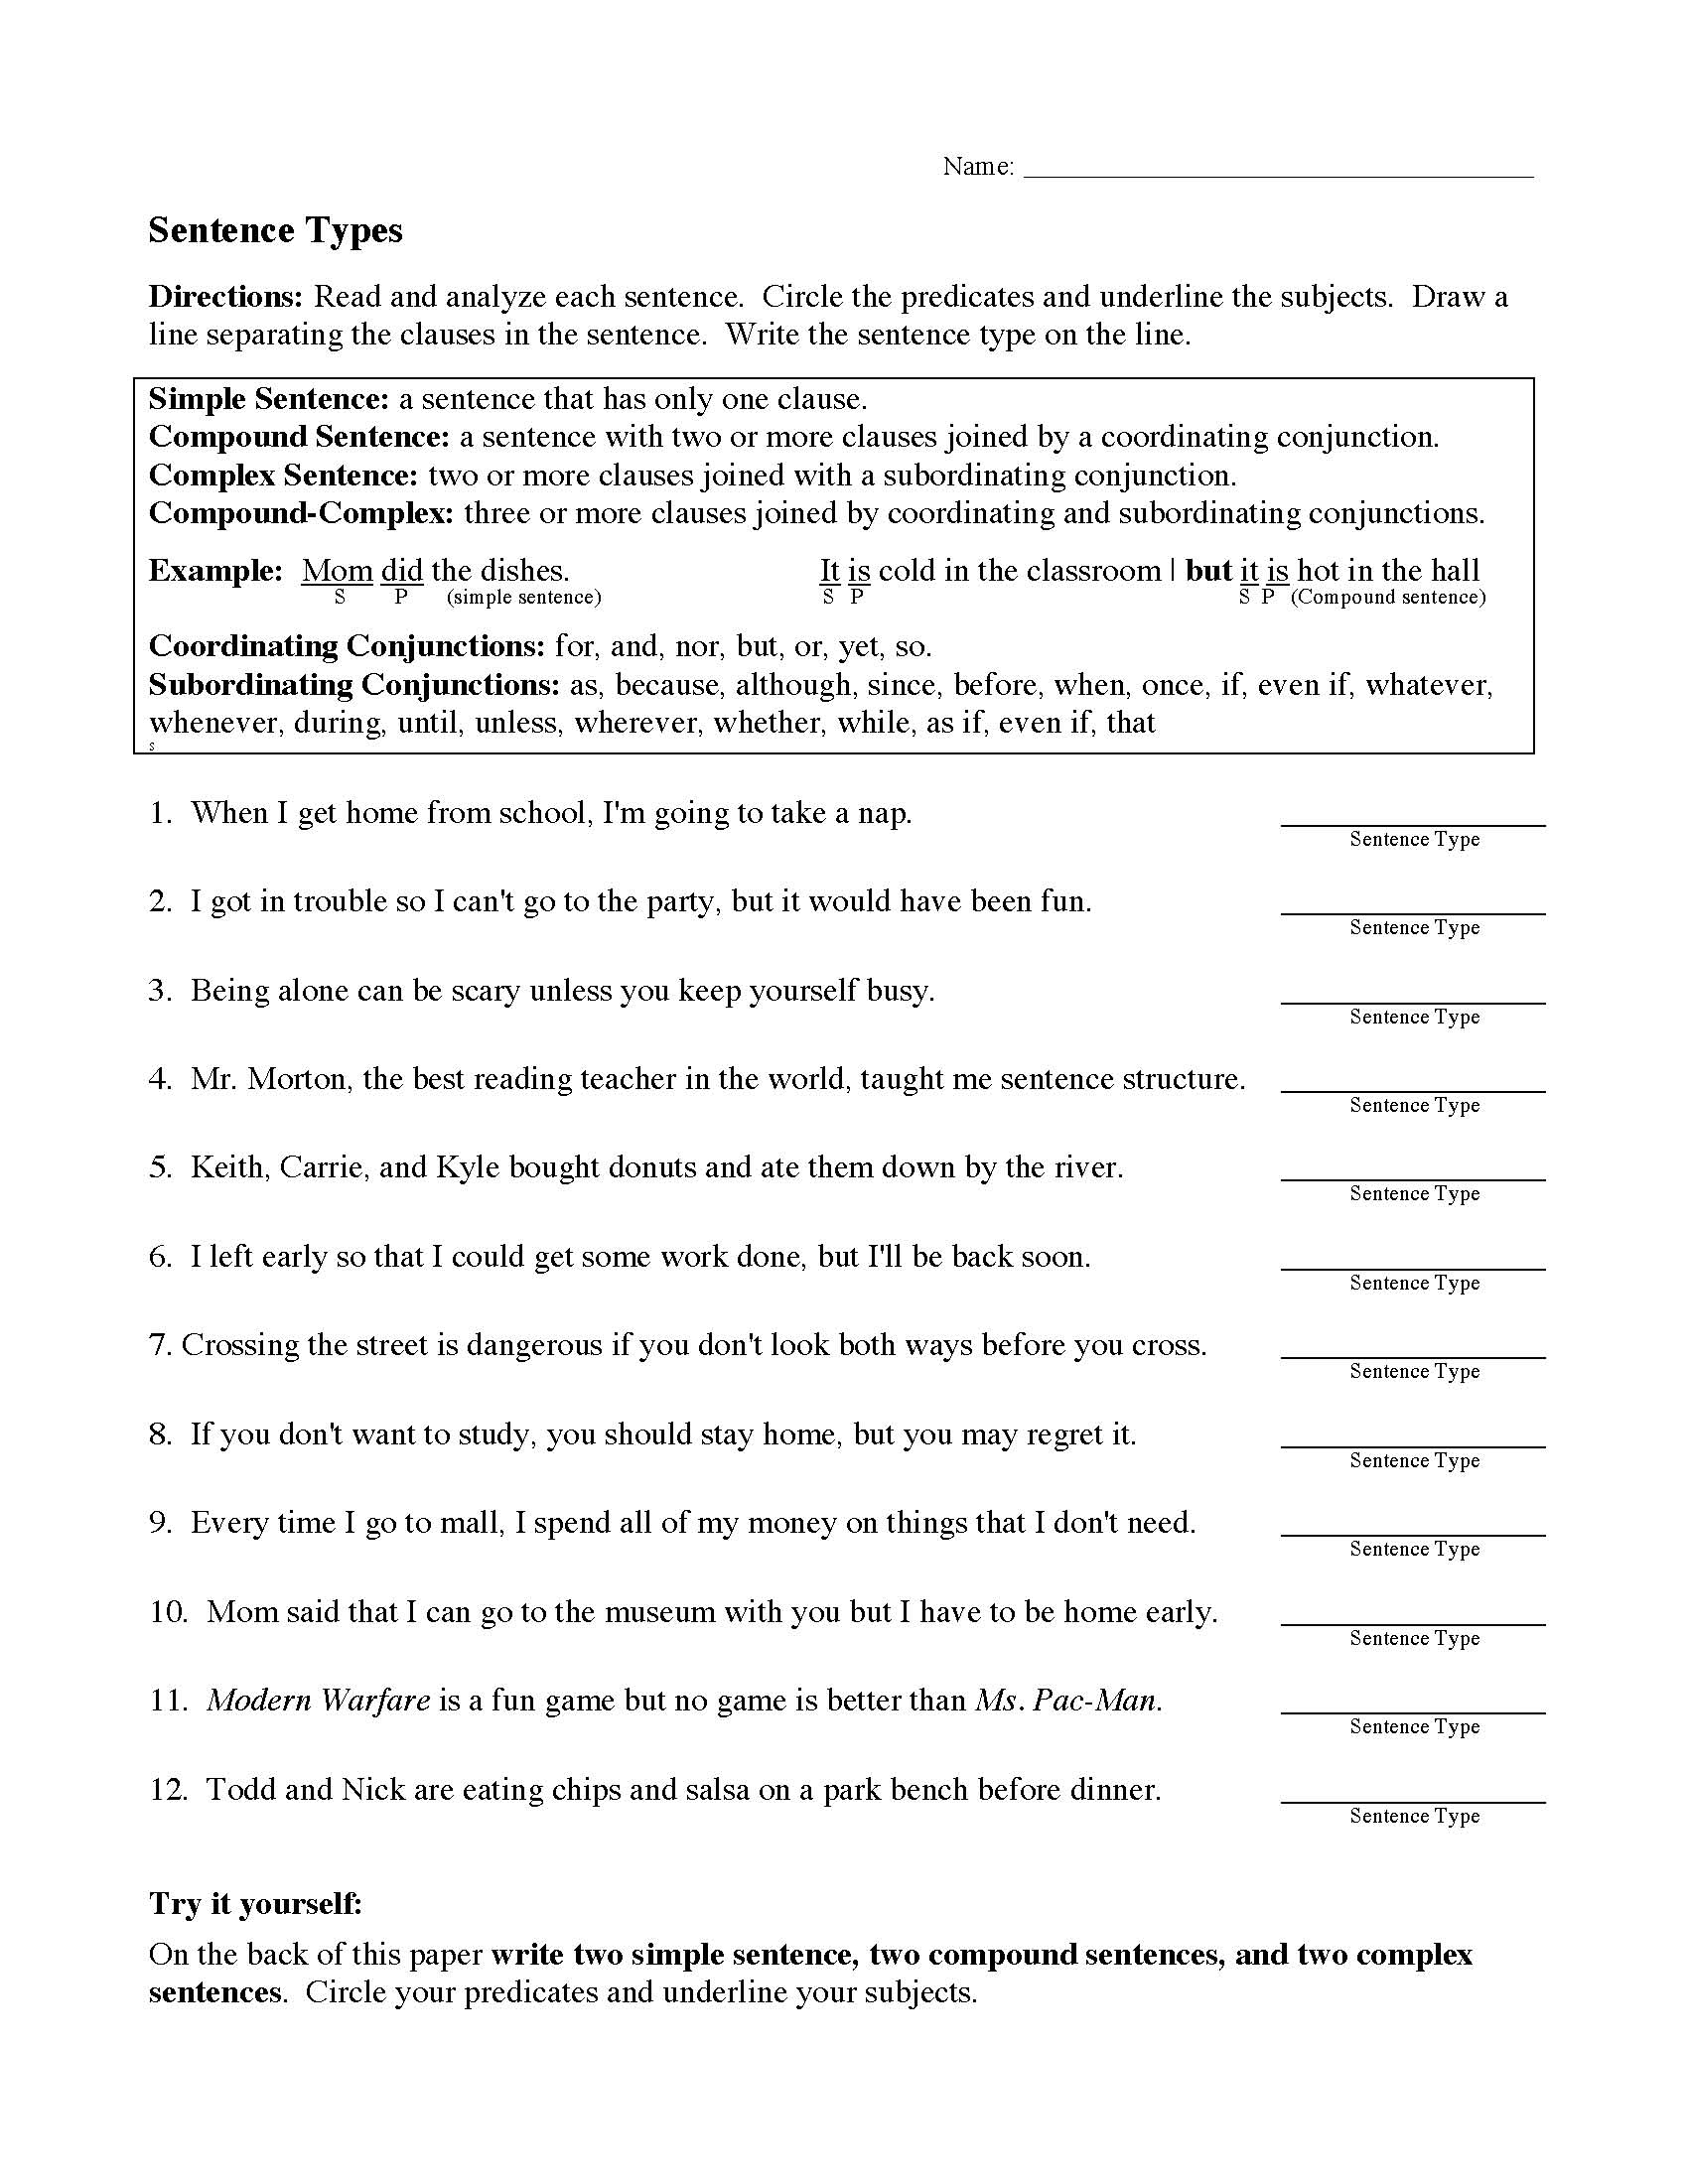 This is a preview image of Sentence Types Worksheet. Click on it to enlarge it or view the source file.